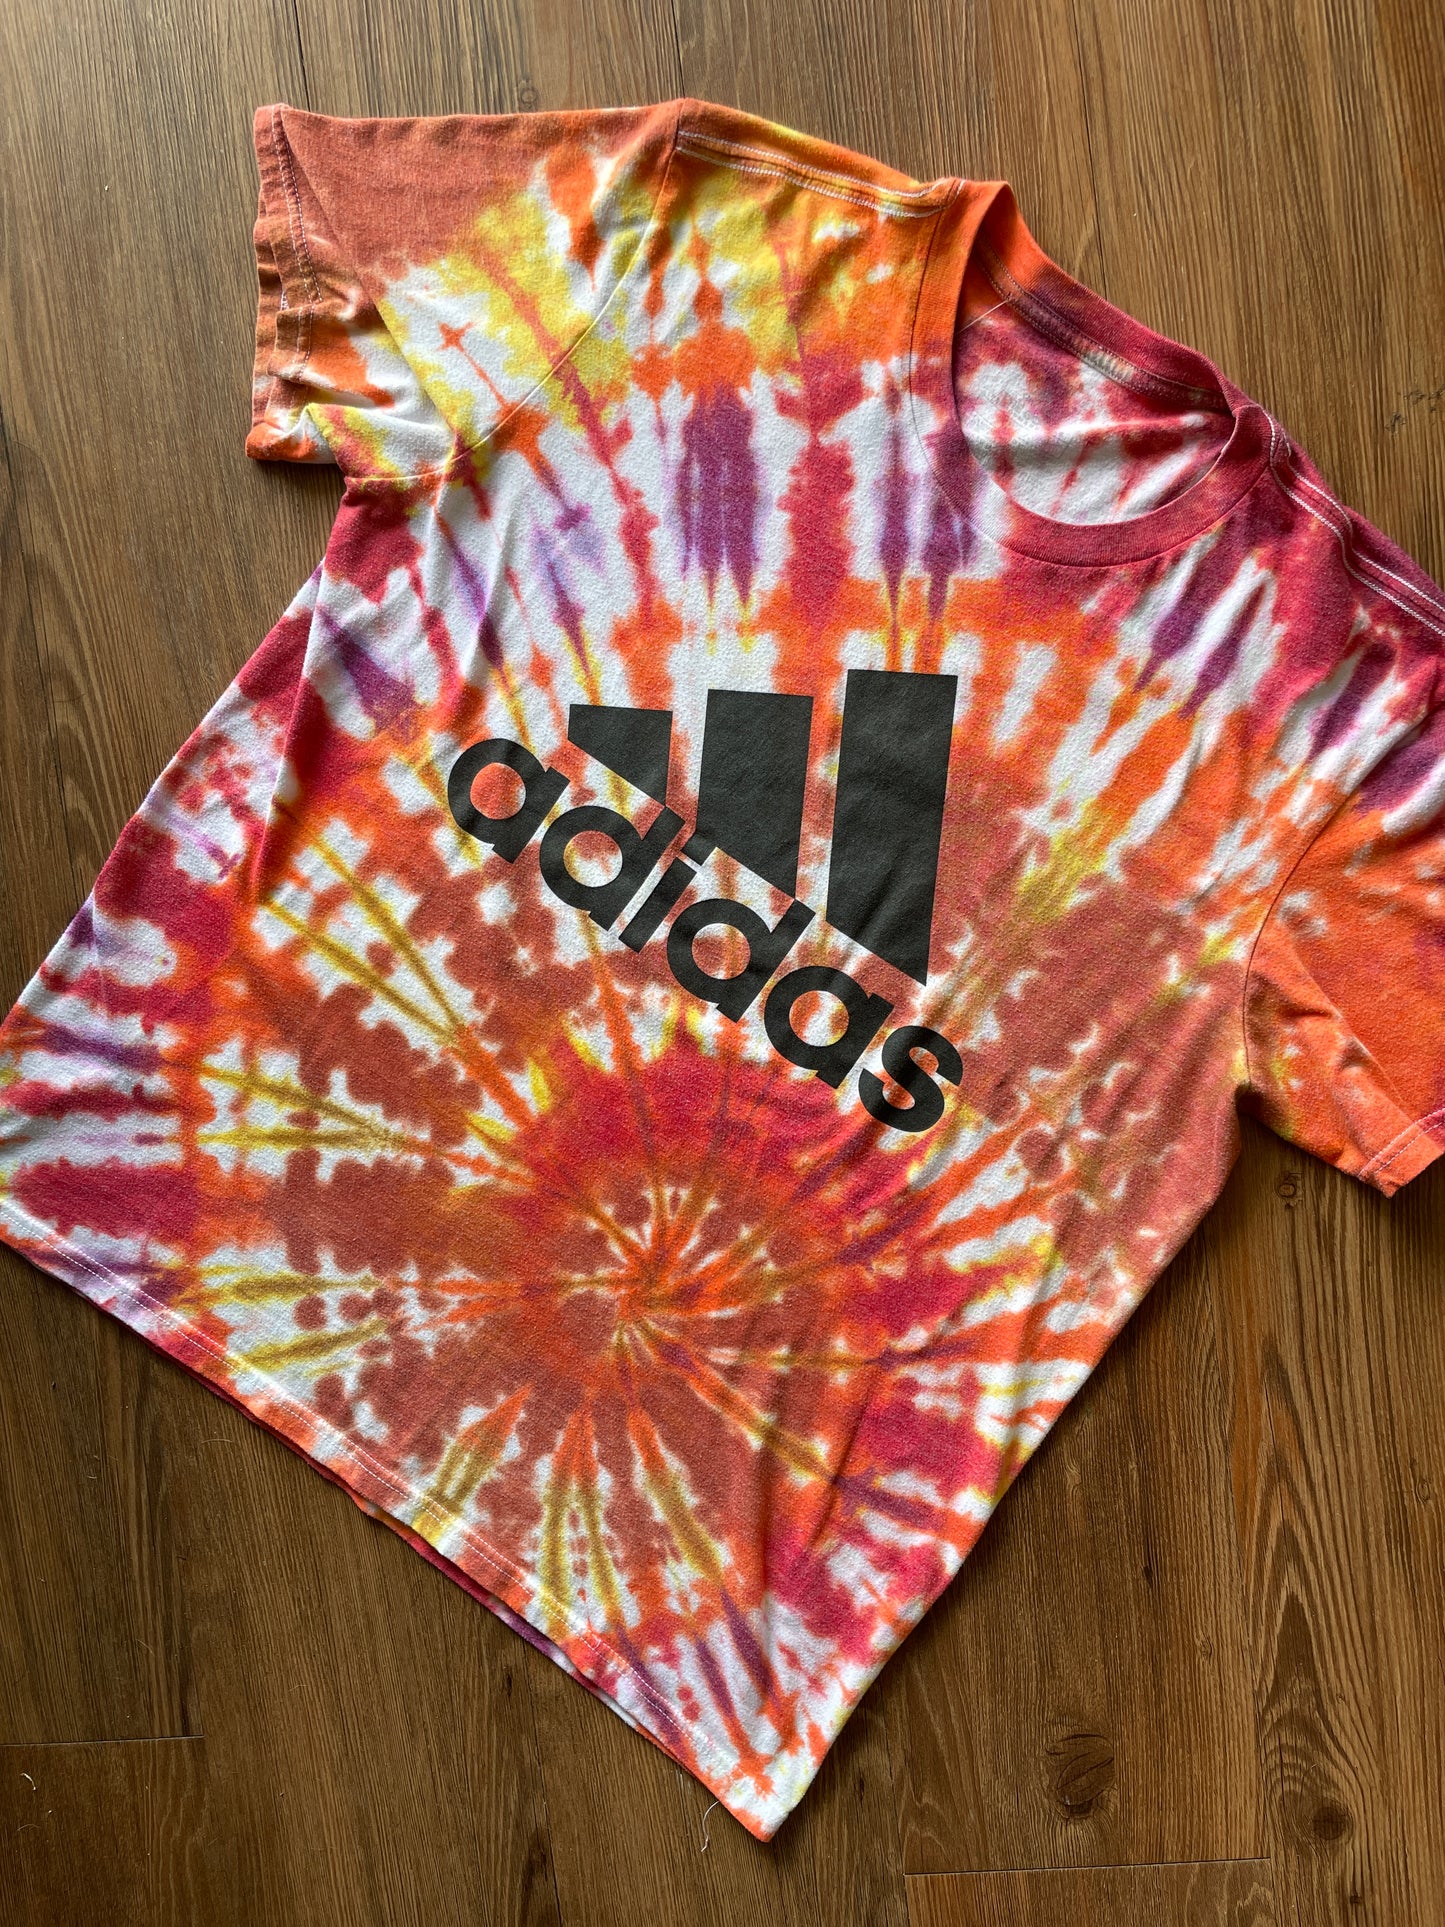 LARGE Men’s adidas Three Stripes Handmade Tie Dye T-Shirt | One-Of-a-Kind Orange, Red, and Yellow SpiralShort Sleeve